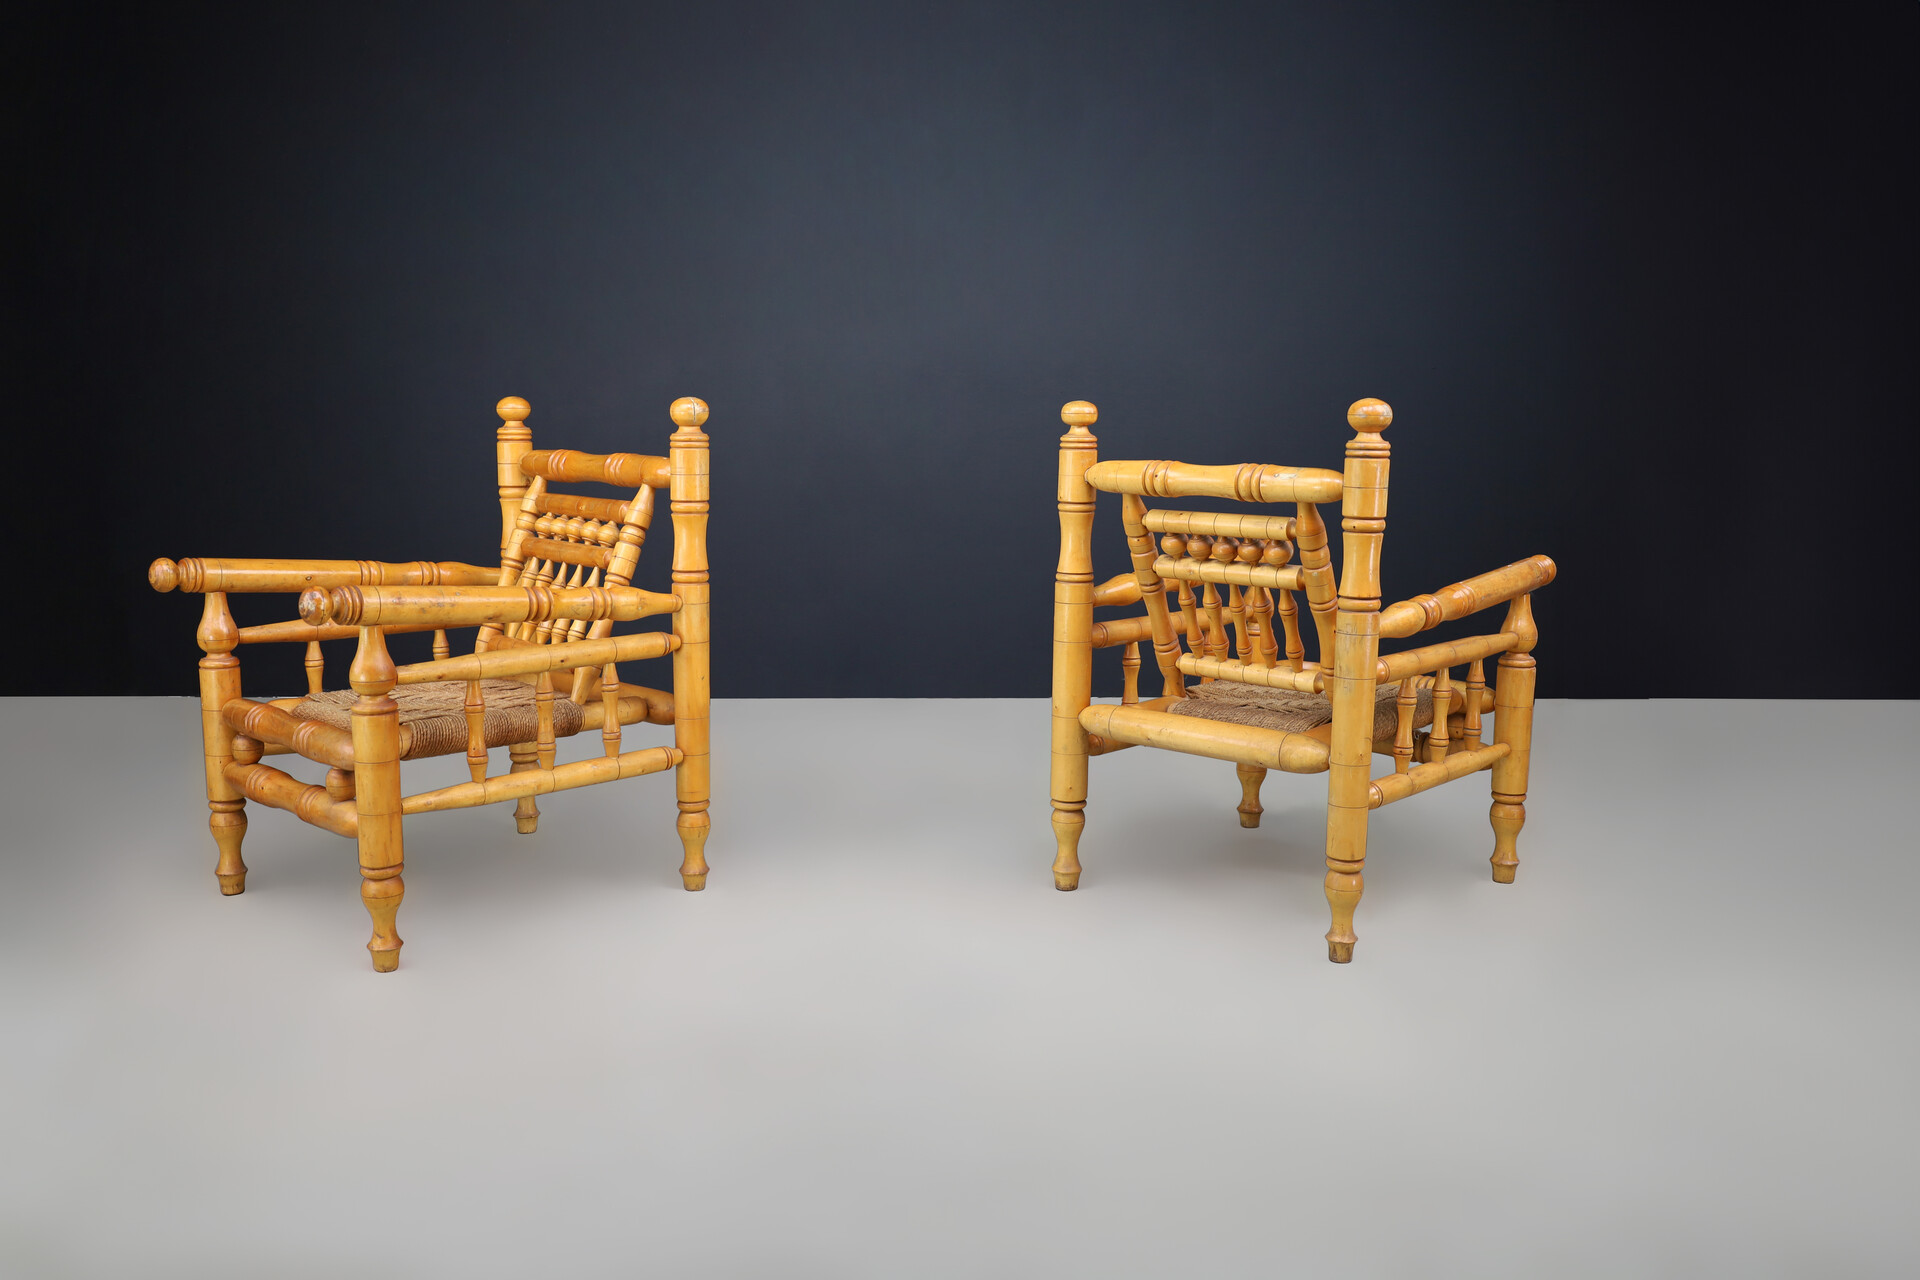 Mid century modern Adrien Audoux and Frida Minet beech and rope Lounge Chairs set/2, France 1950 Mid-20th century